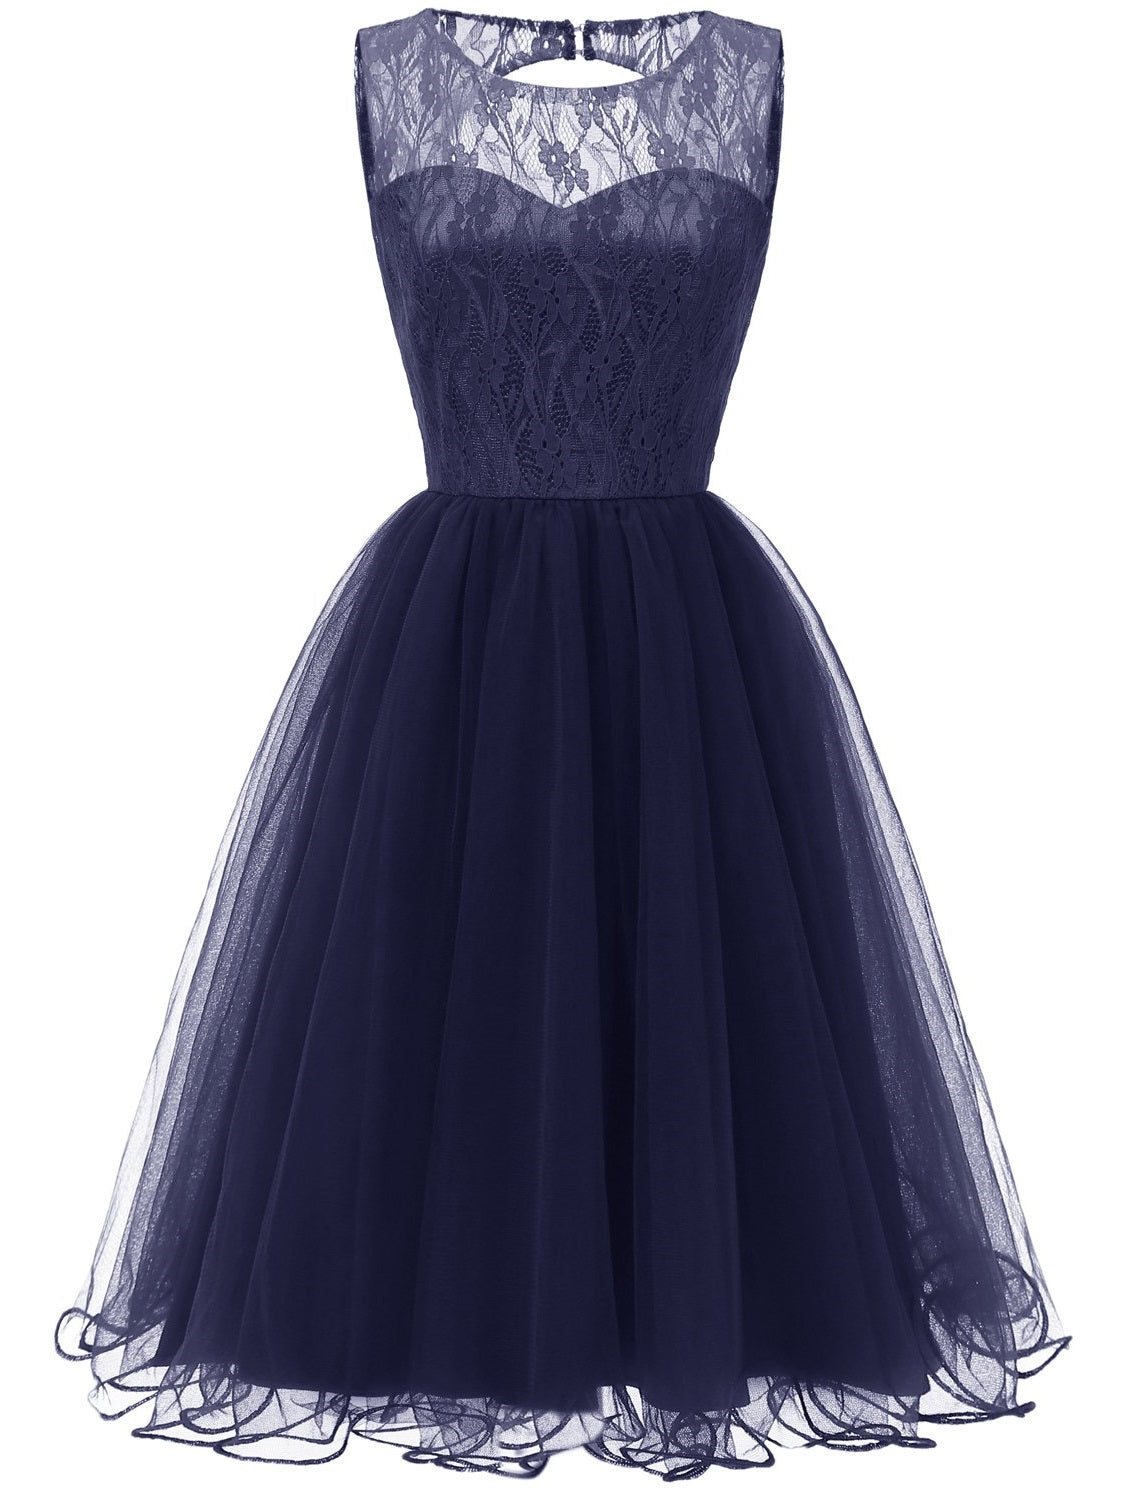 Retro Modest Navy Blue Lace Tulle Cocktail Dress Short Vintage Homecoming Dress, 074N-Dolly Gown